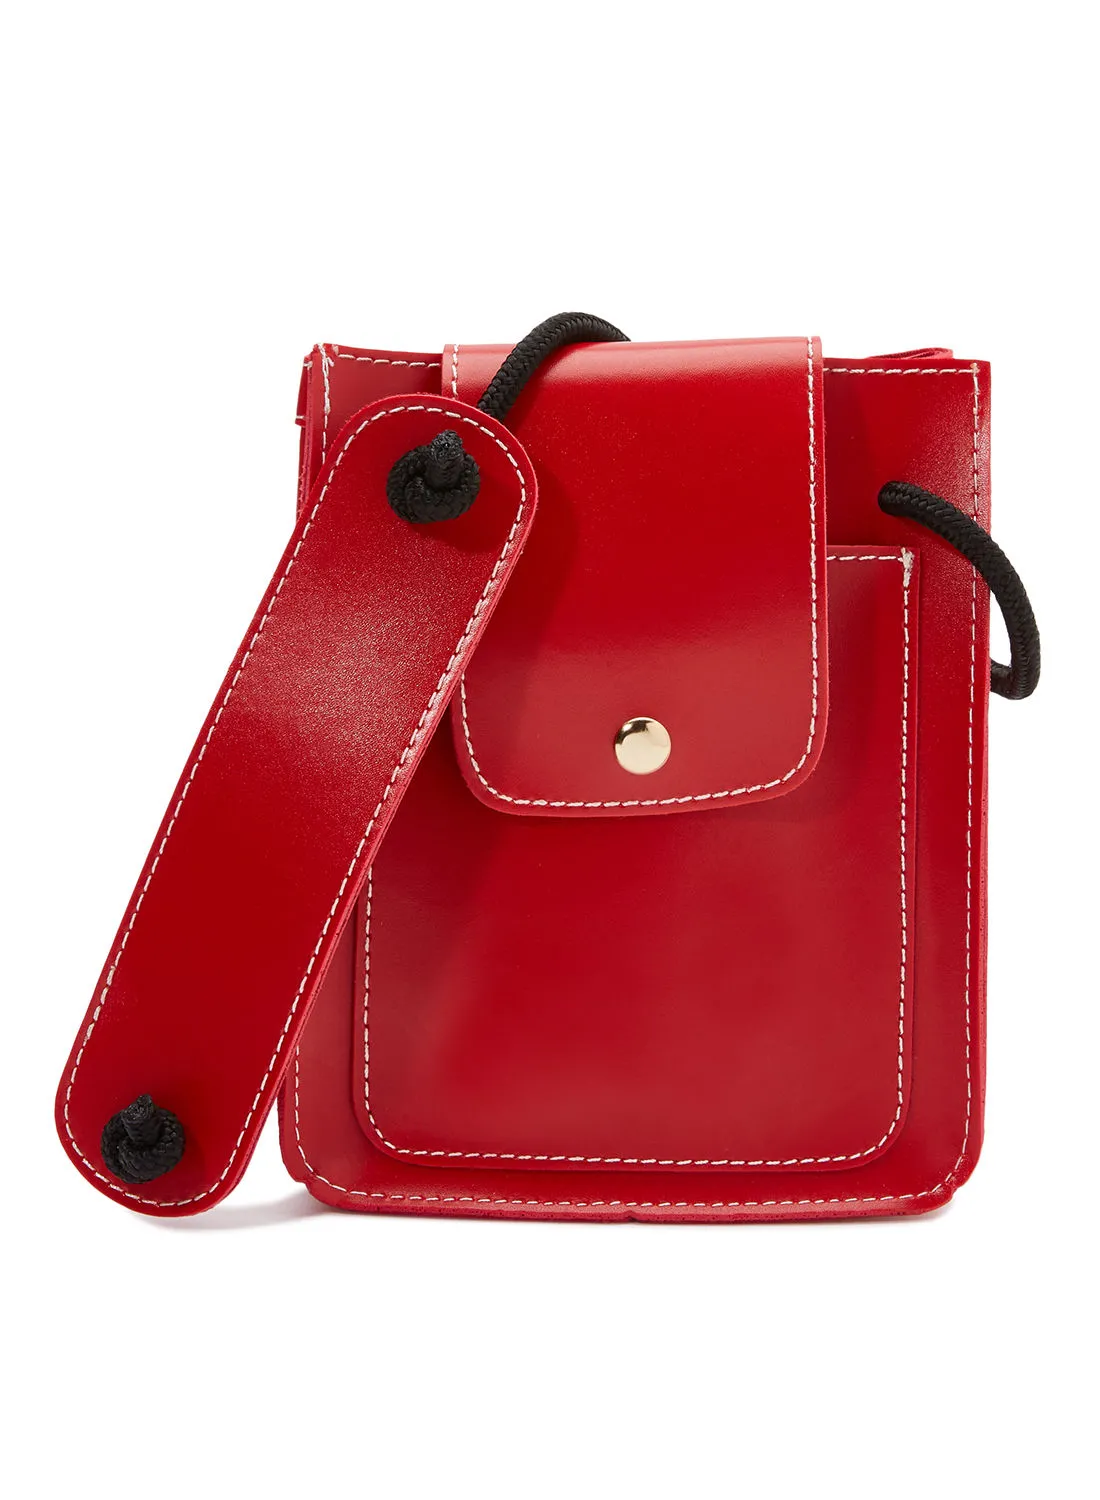 YUEJIN Unique Accent Crossbody Bag Red